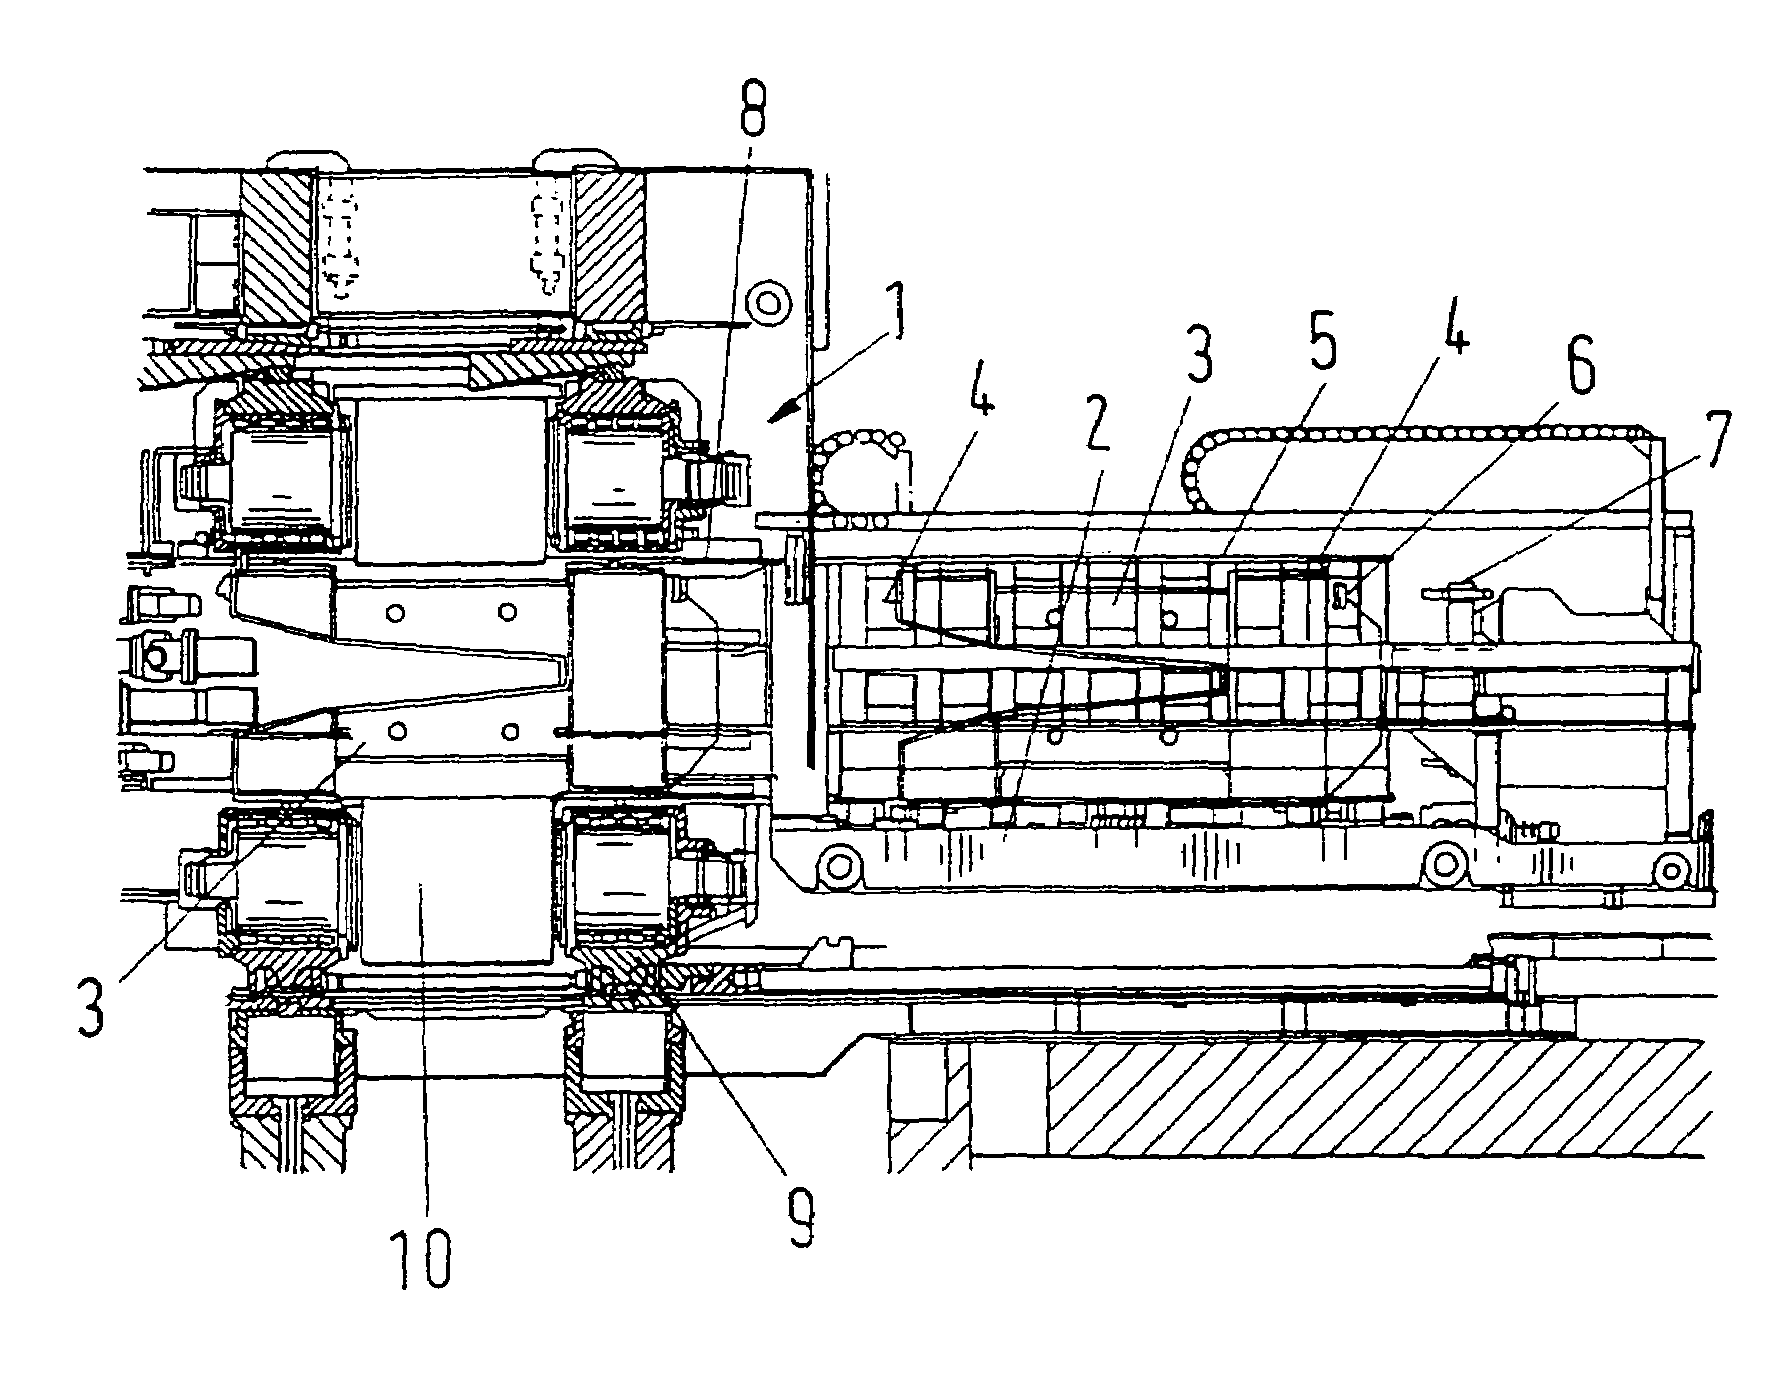 Device and working method for automatically changing the work rolls, the back-up rolls and the intermediate rolls of a single-stand or multiple-stand strip mill